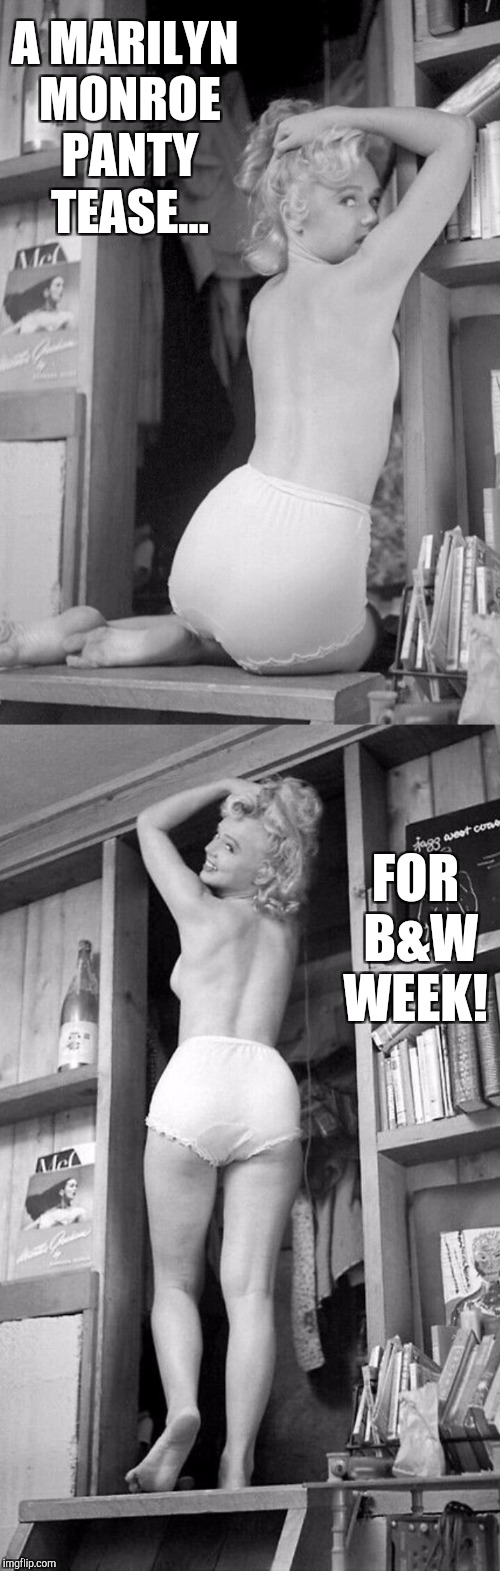 A classic curvy lady in big girl panties, now that's sexy! White & Black Meme Week, a Pipe_Picasso event, Oct. 8th - 14th  | A MARILYN MONROE PANTY TEASE... FOR B&W WEEK! | image tagged in black and white,marilyn monroe,panties,big girl panties,jbmemegeek,sexy women | made w/ Imgflip meme maker